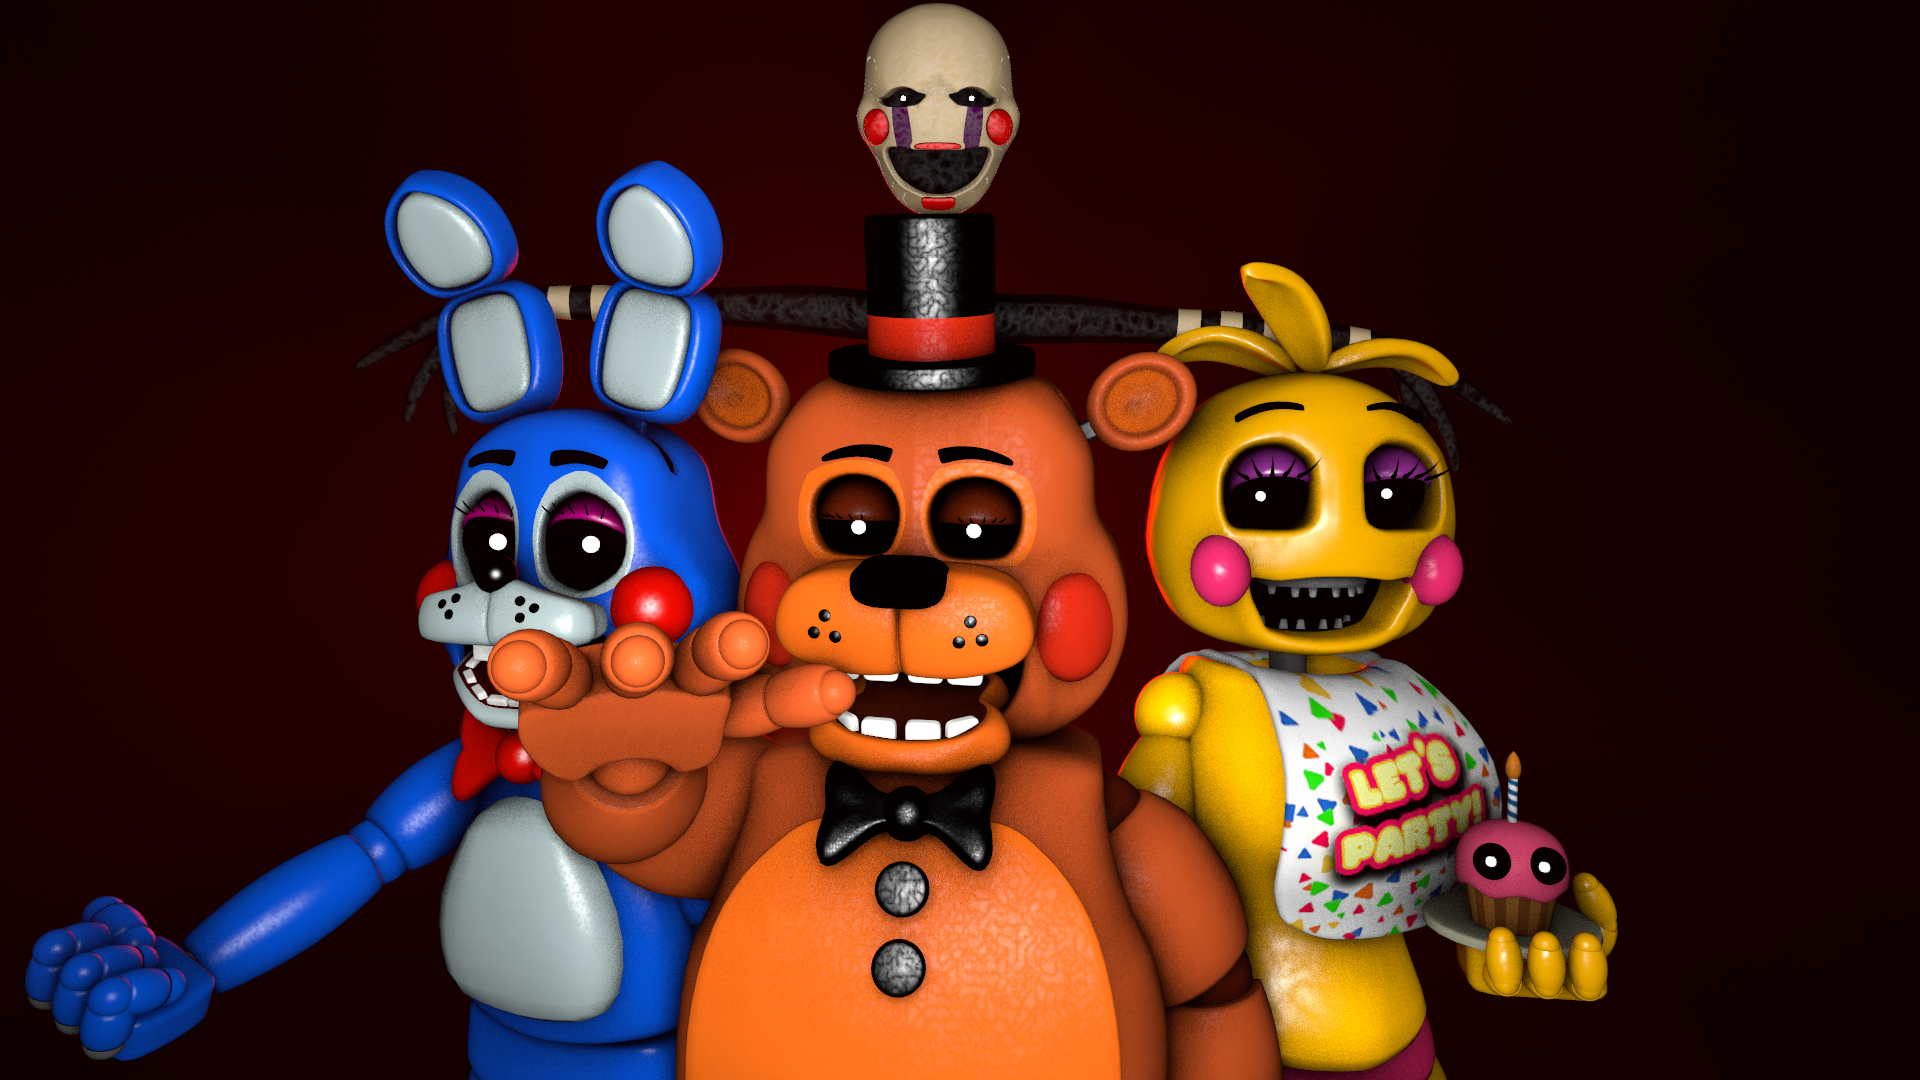 FNAF 1 but with Toy Animatronics & Puppet!